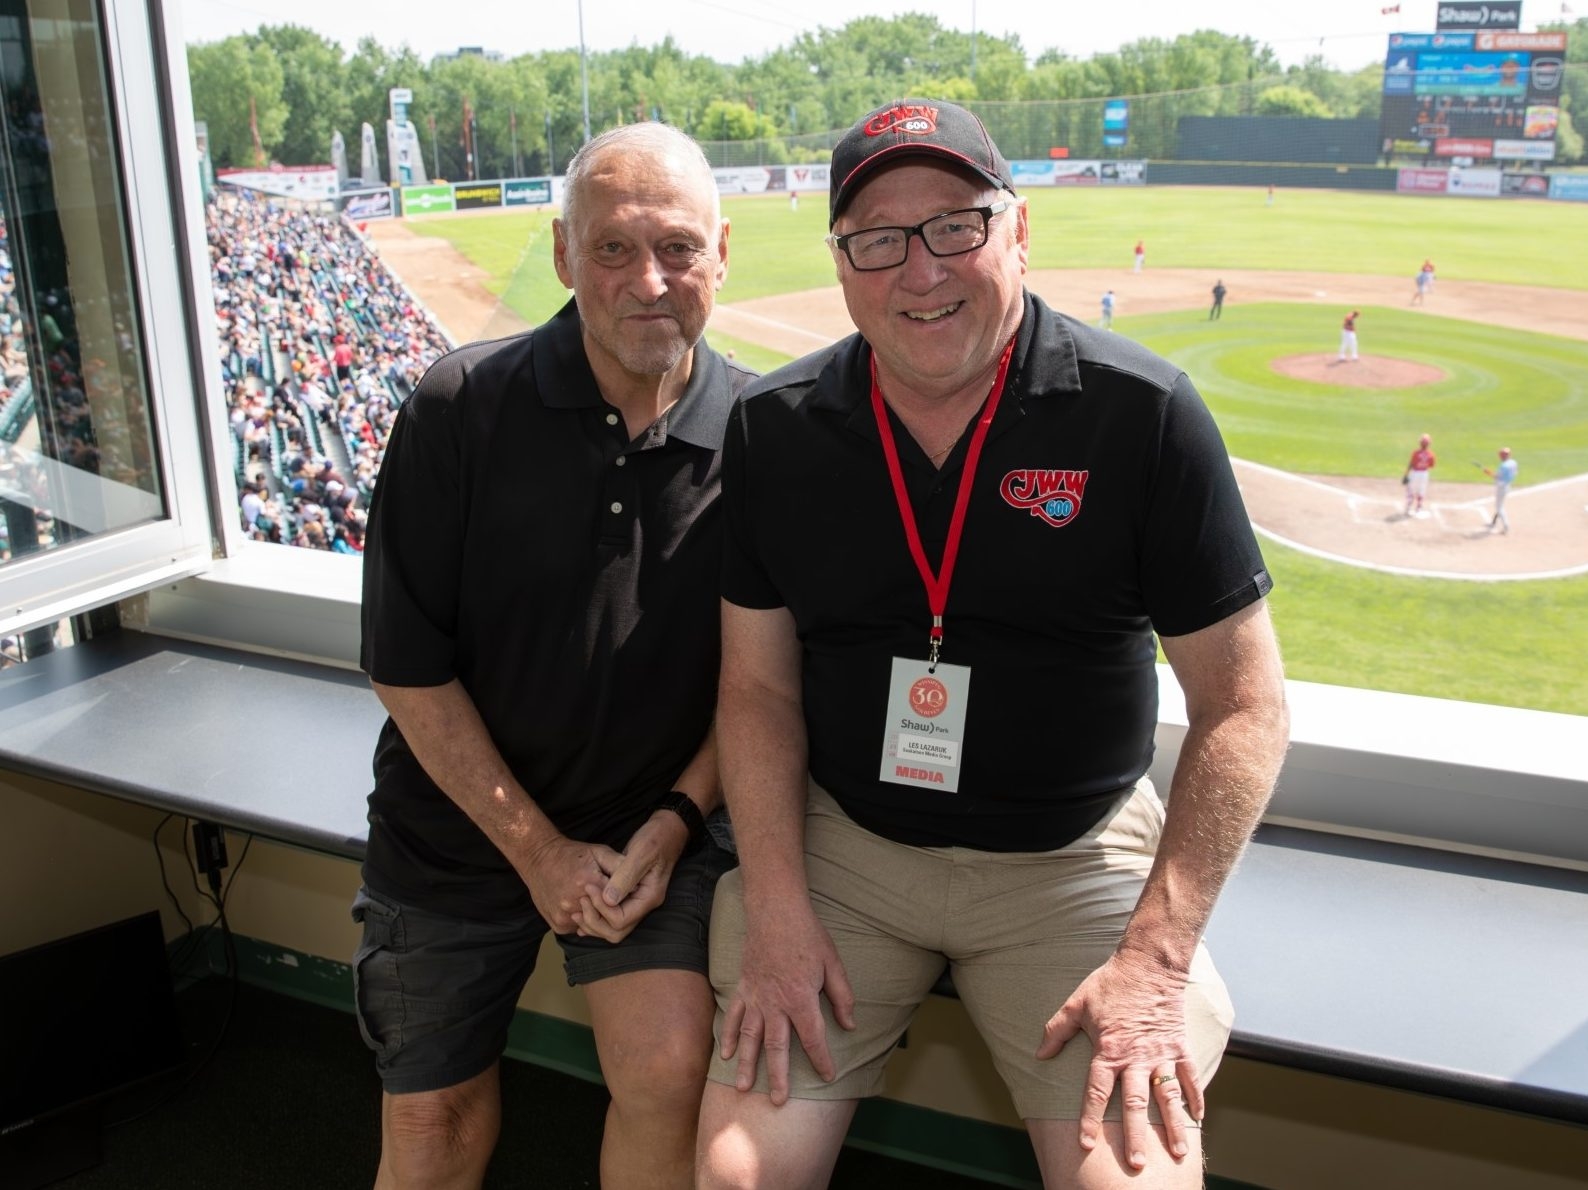 voices from the past: former broadcasters stumble into 'crazy weird' goldeyes reunion